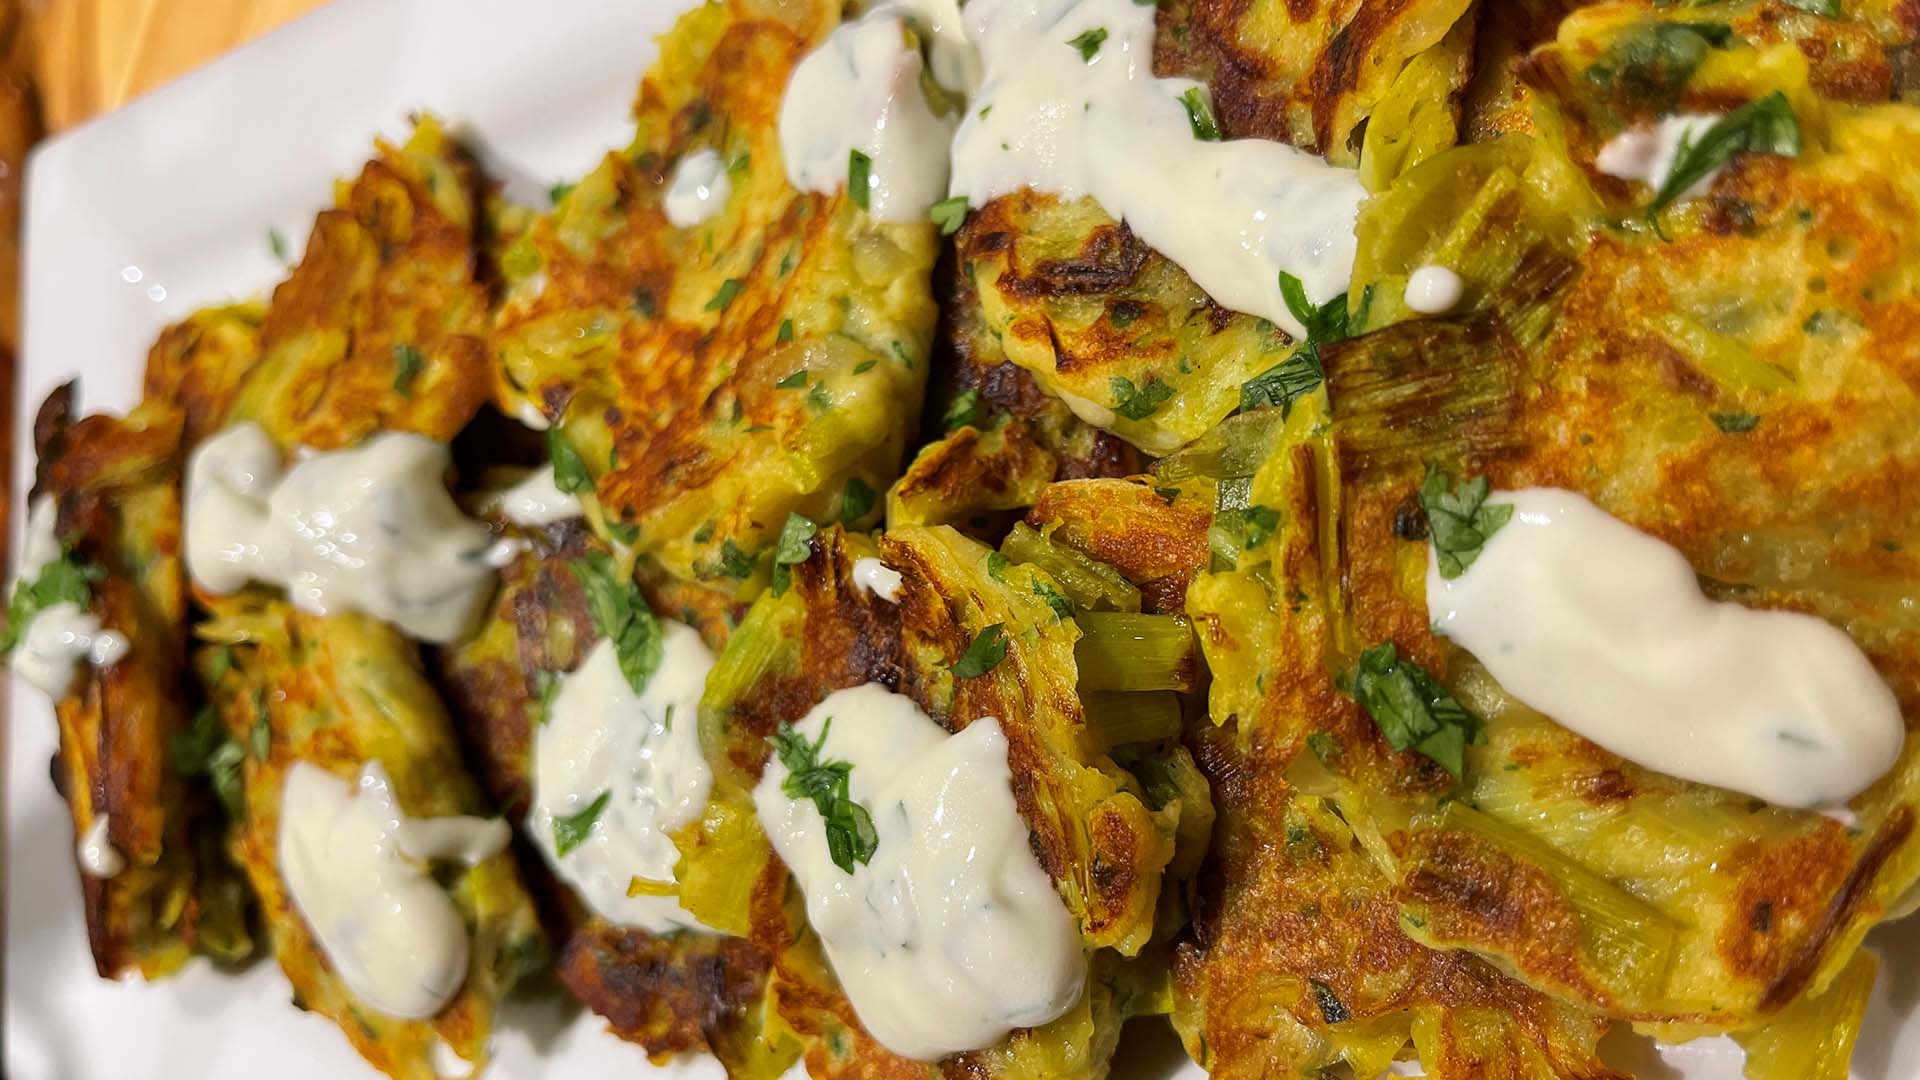 Leek and parsley fritters